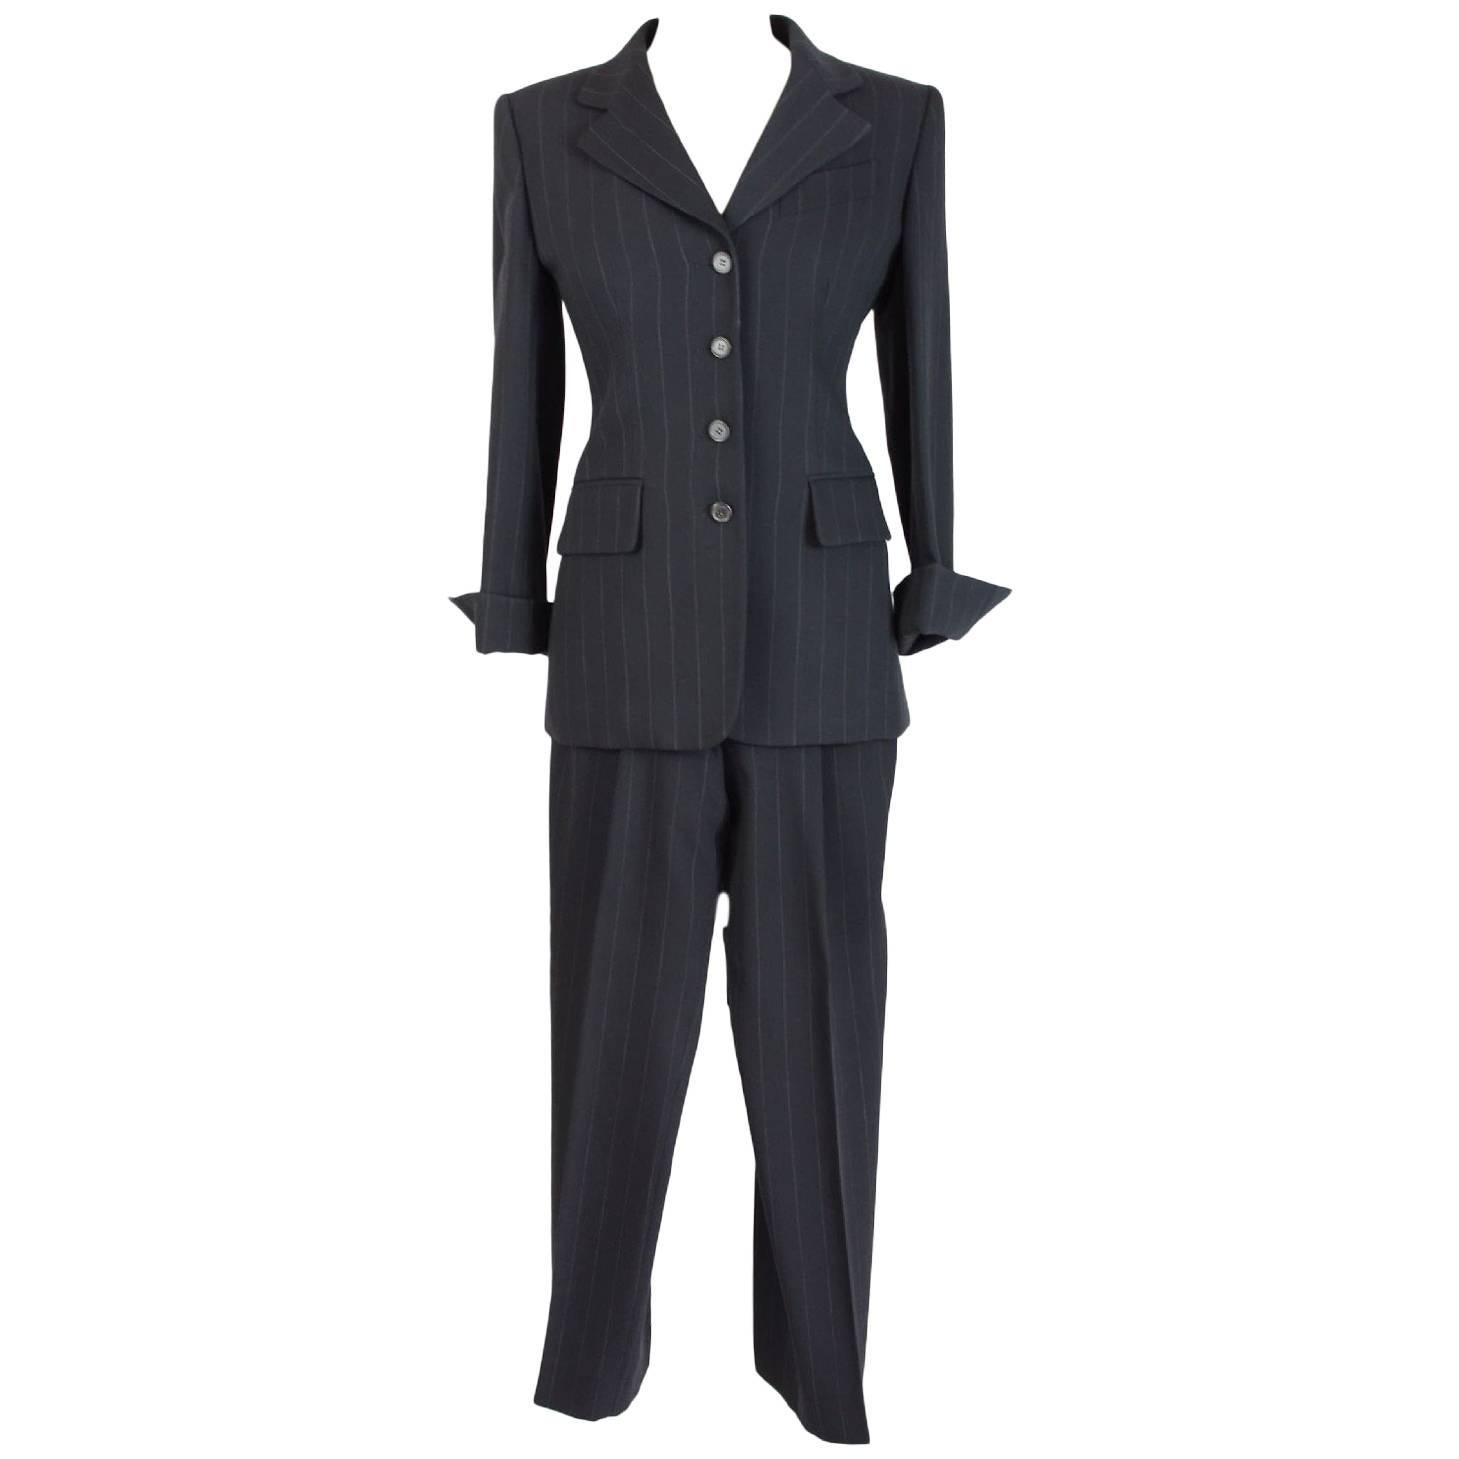 1990s Prada Gray Pinstripe Wool Jacket Suit Pants Size 40 Made Italy Women's  For Sale